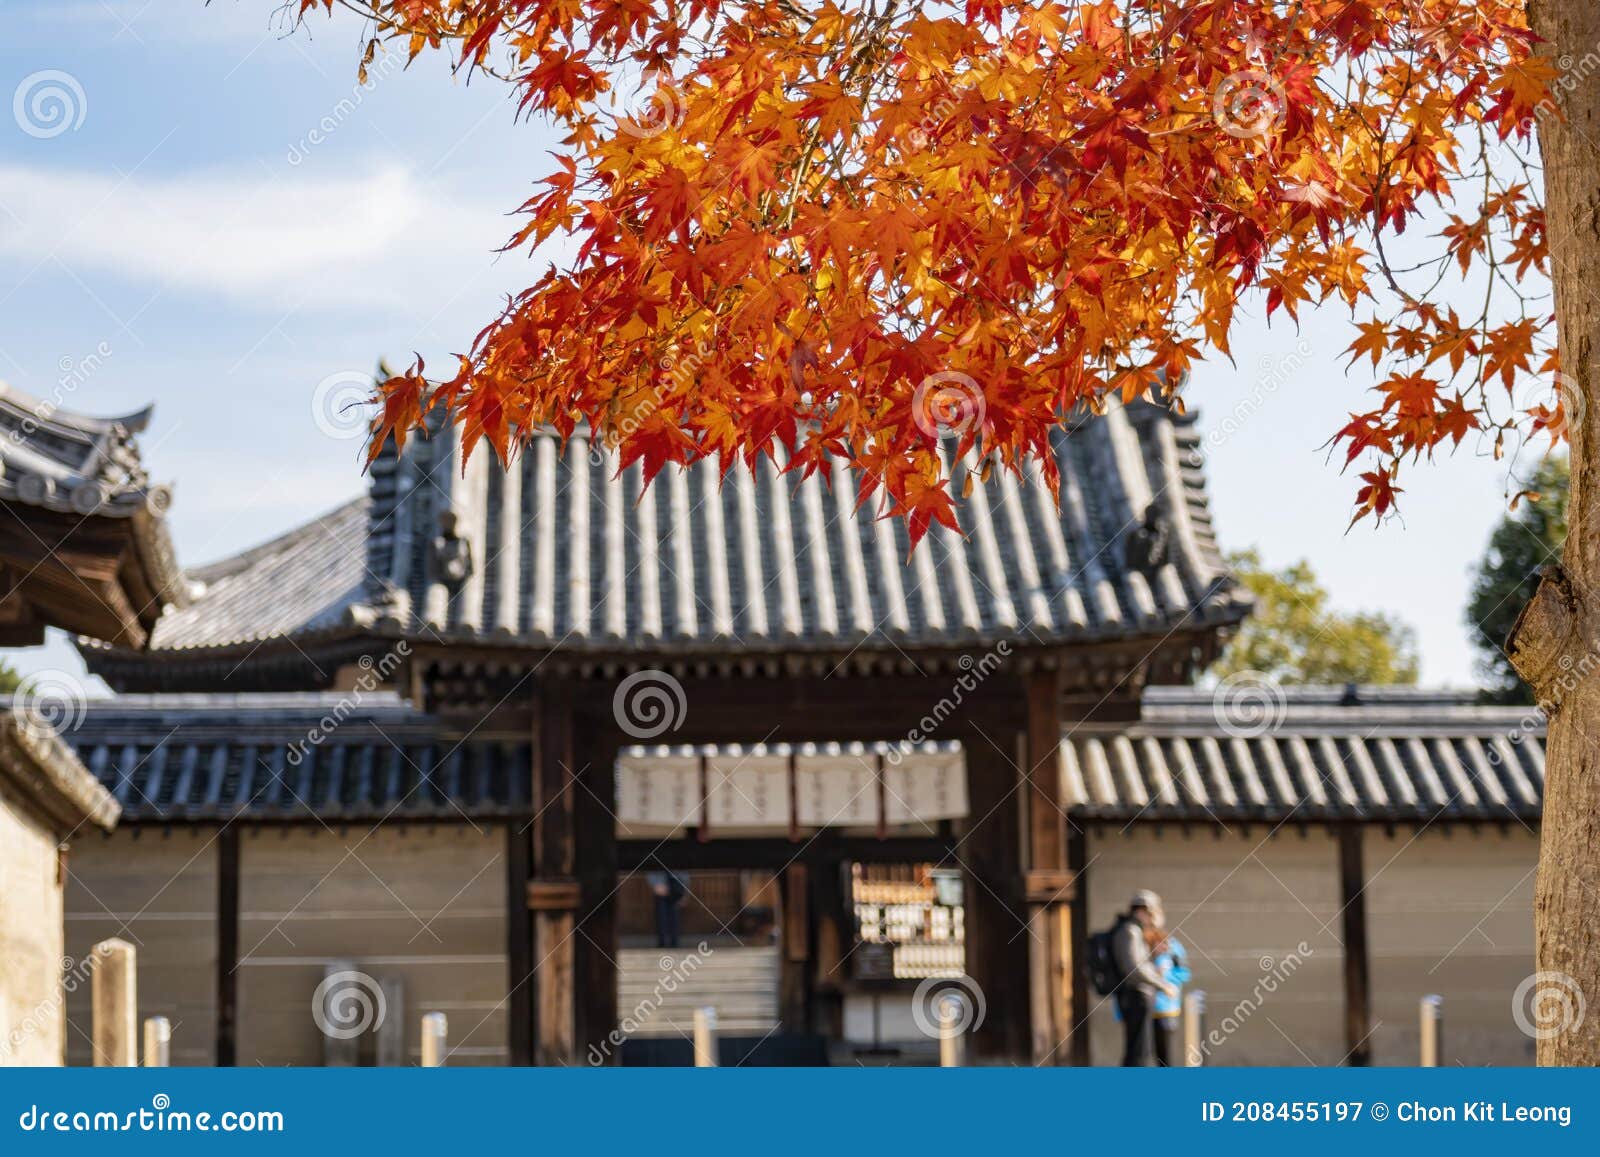 Fall Color Over the Historical Horyu Ji Stock Image - Image of roof ...